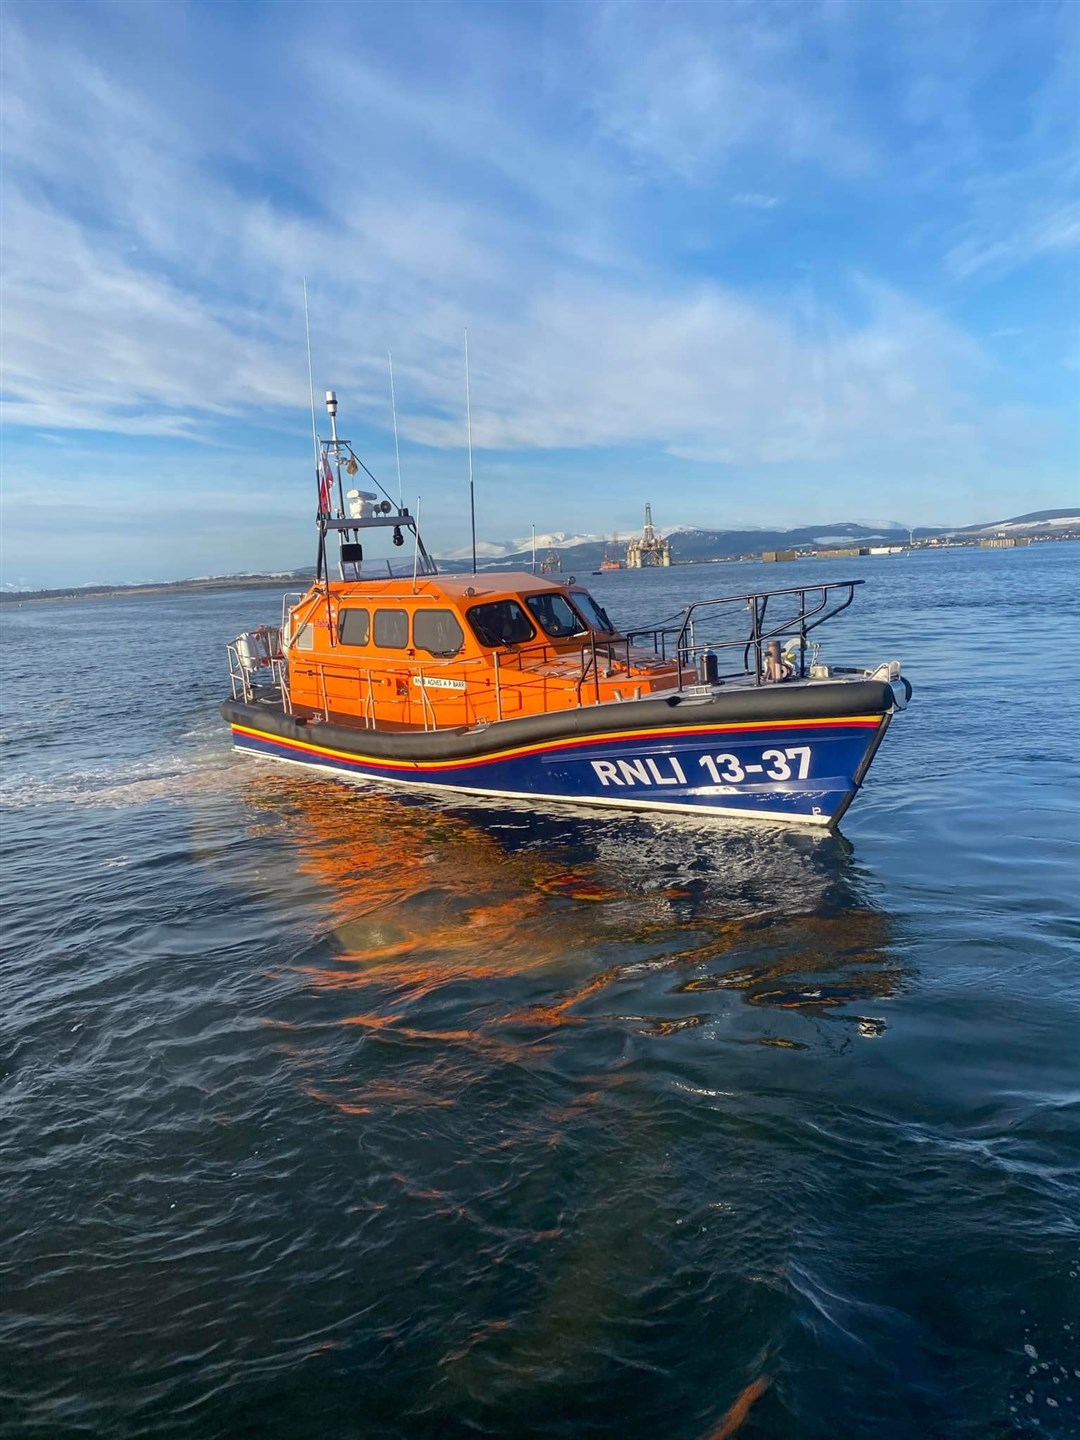 The Shannon Class Lifeboat RNLI 13-37 Agnes AP Barr. Picture: RNLI Invergordon